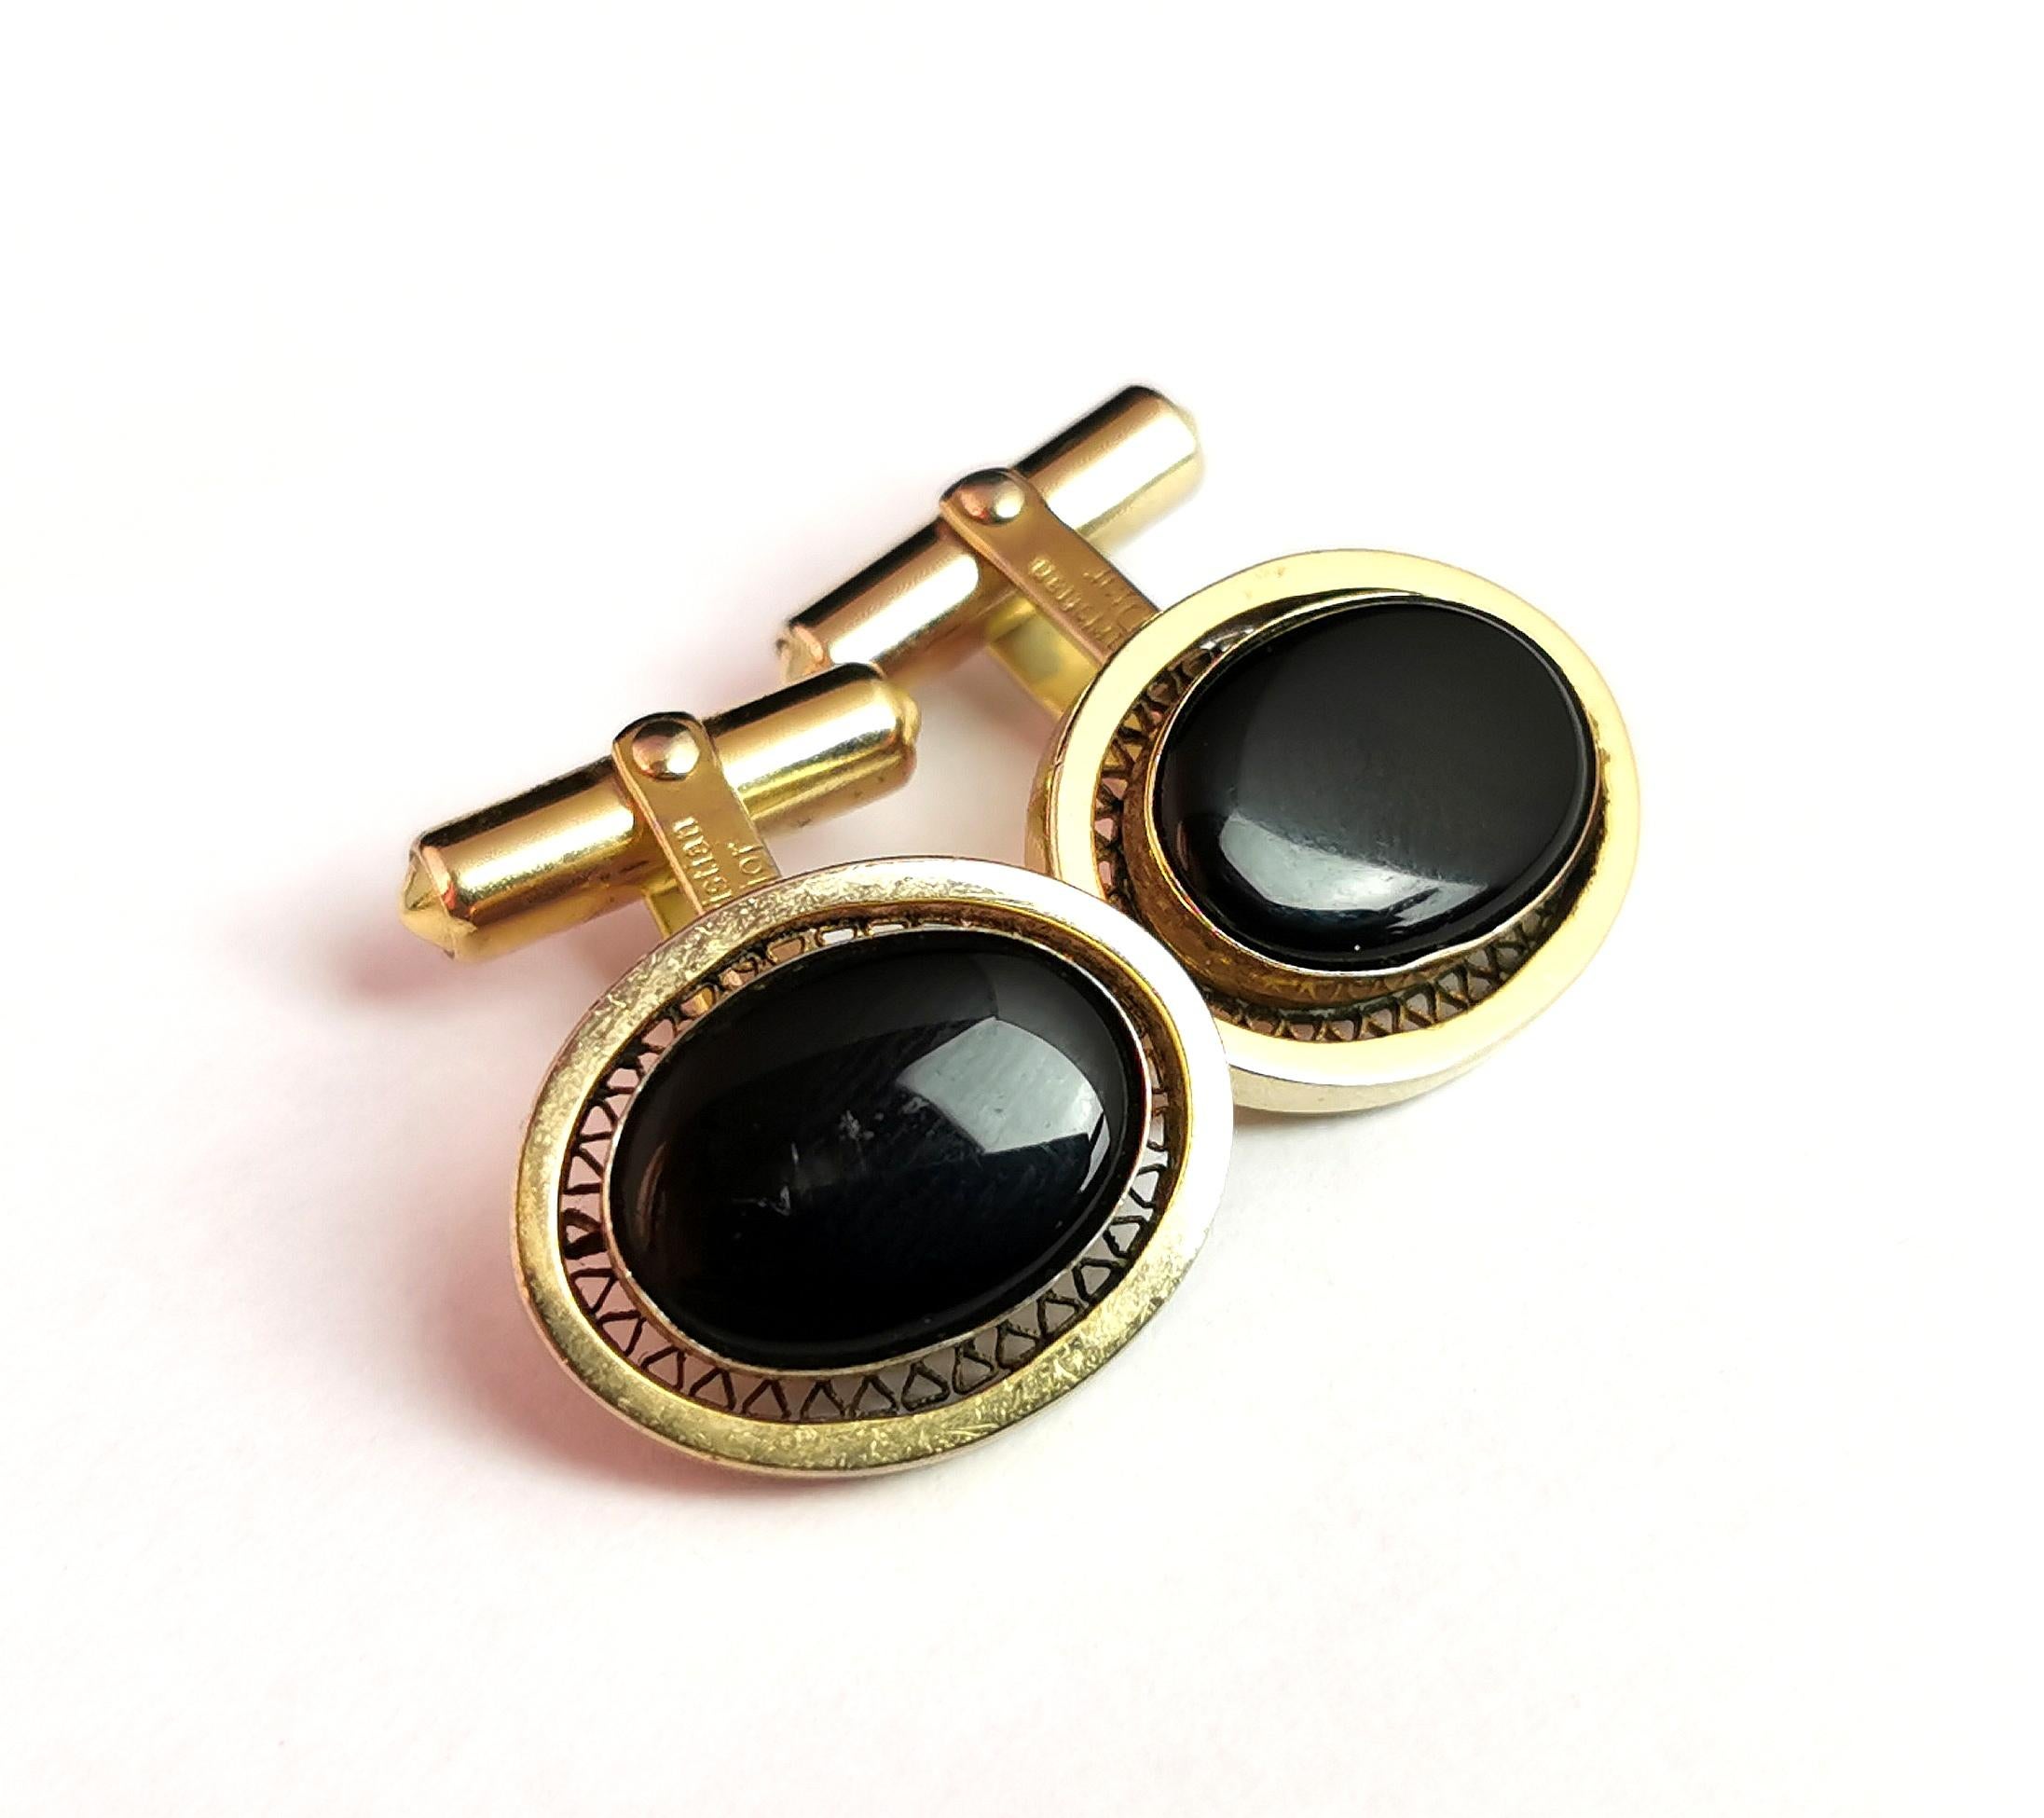 A handsome pair of vintage Christian Dior cufflinks.

Gold tone metal with a black enamelled oval centre and a cut out lattice metalwork rim.

The cufflinks are both marked for Christian Dior with a patent and branding.

Condition:
Good used